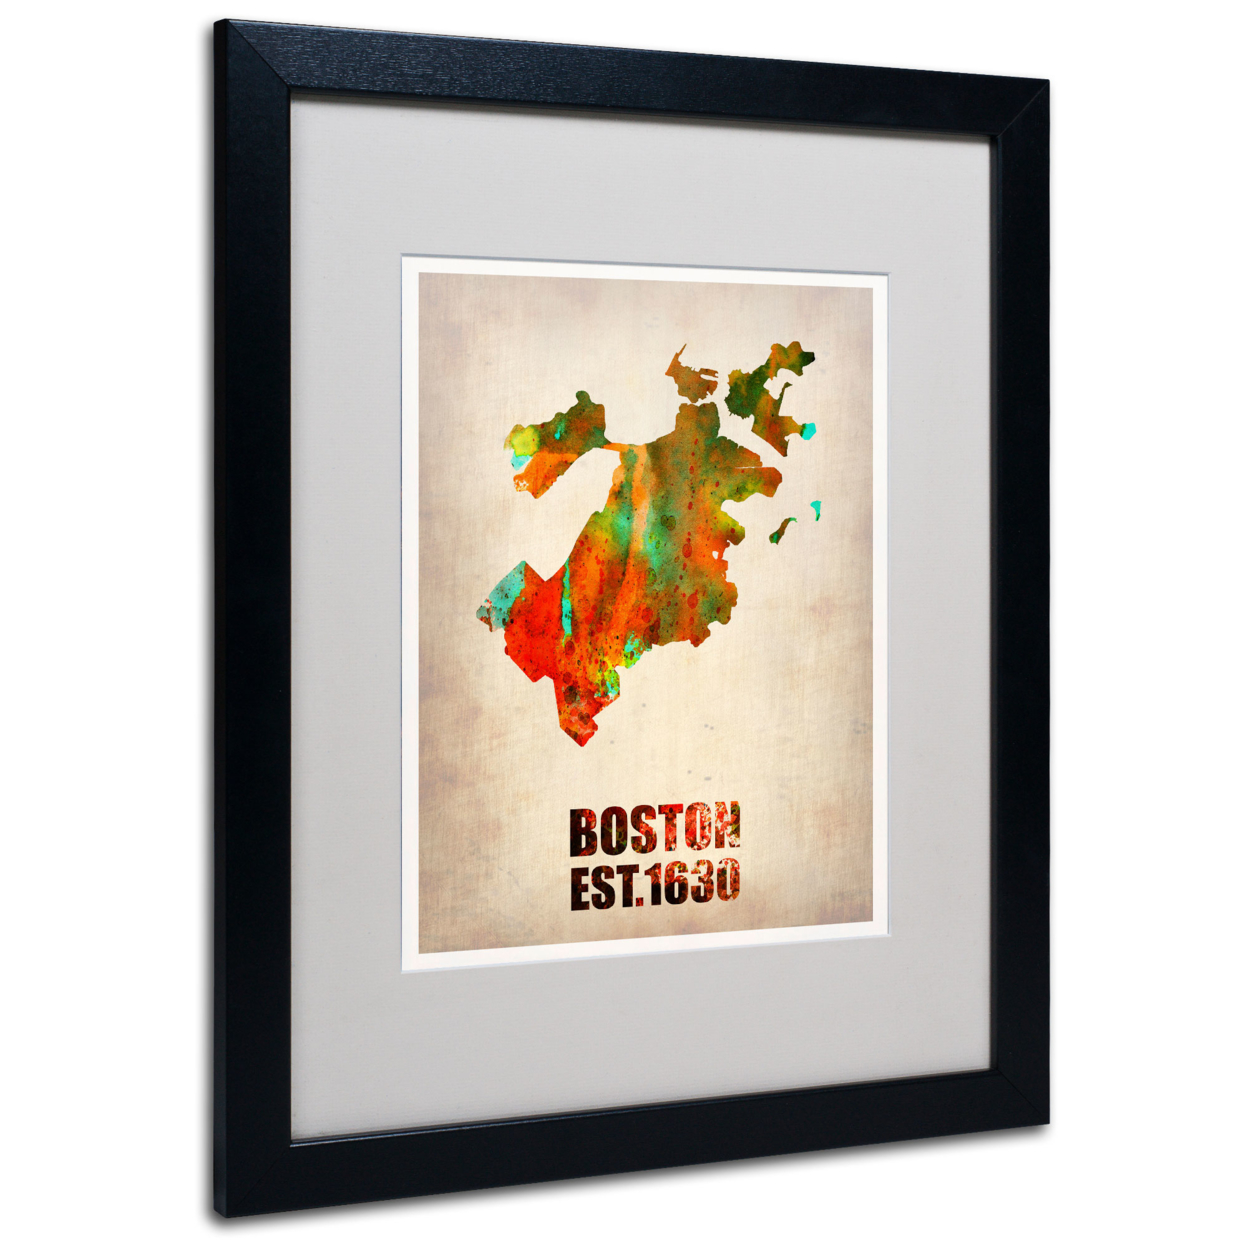 Naxart 'Boston Watercolor Map' Black Wooden Framed Art 18 X 22 Inches